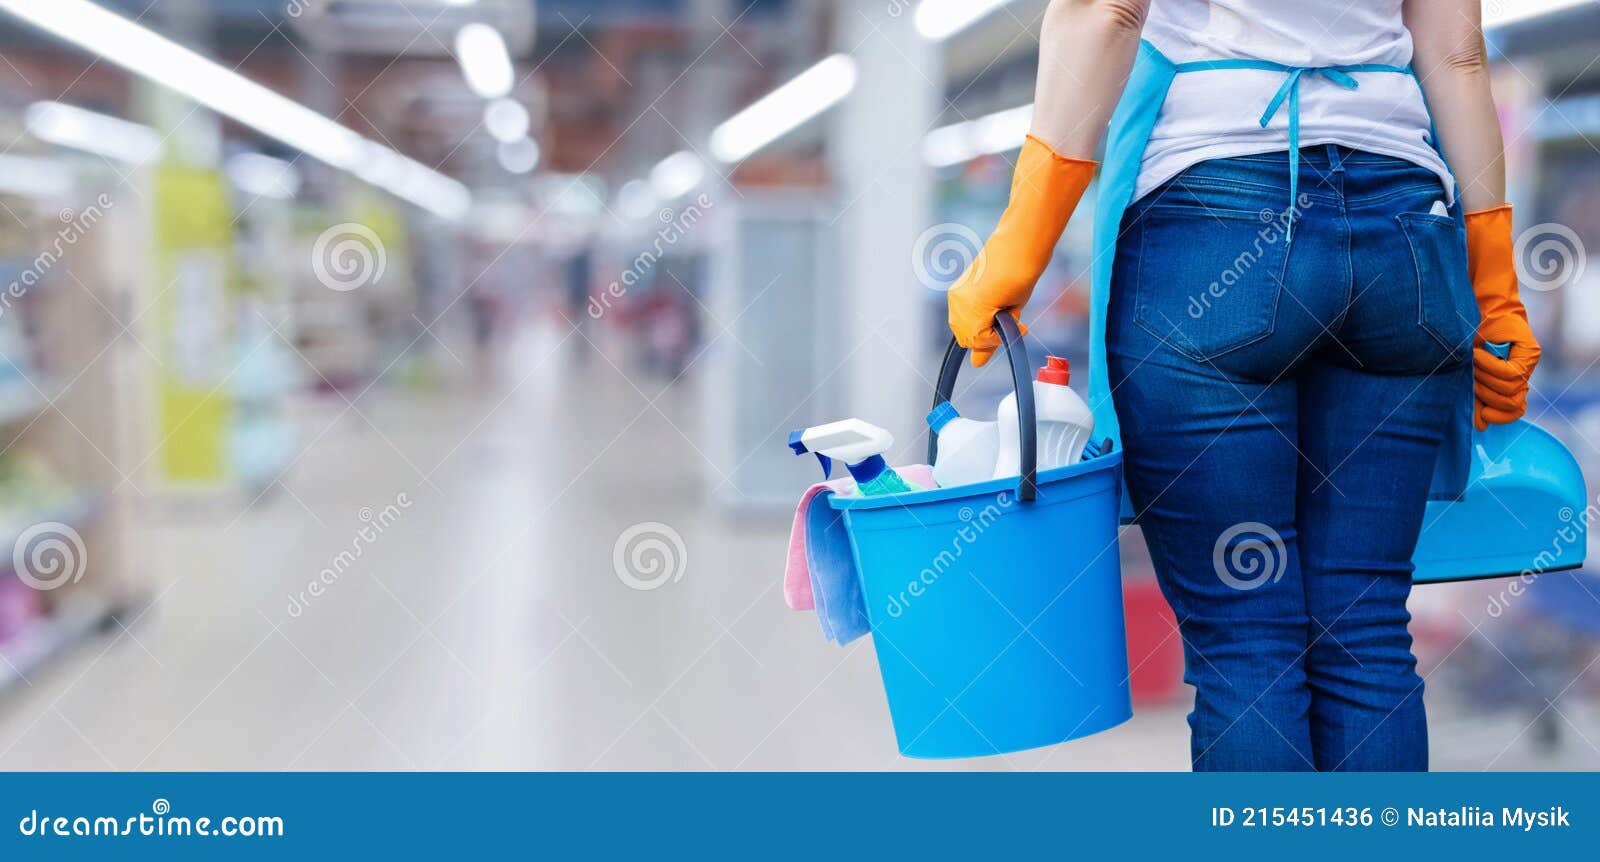 concept of performing cleaning in shops and industrial premises